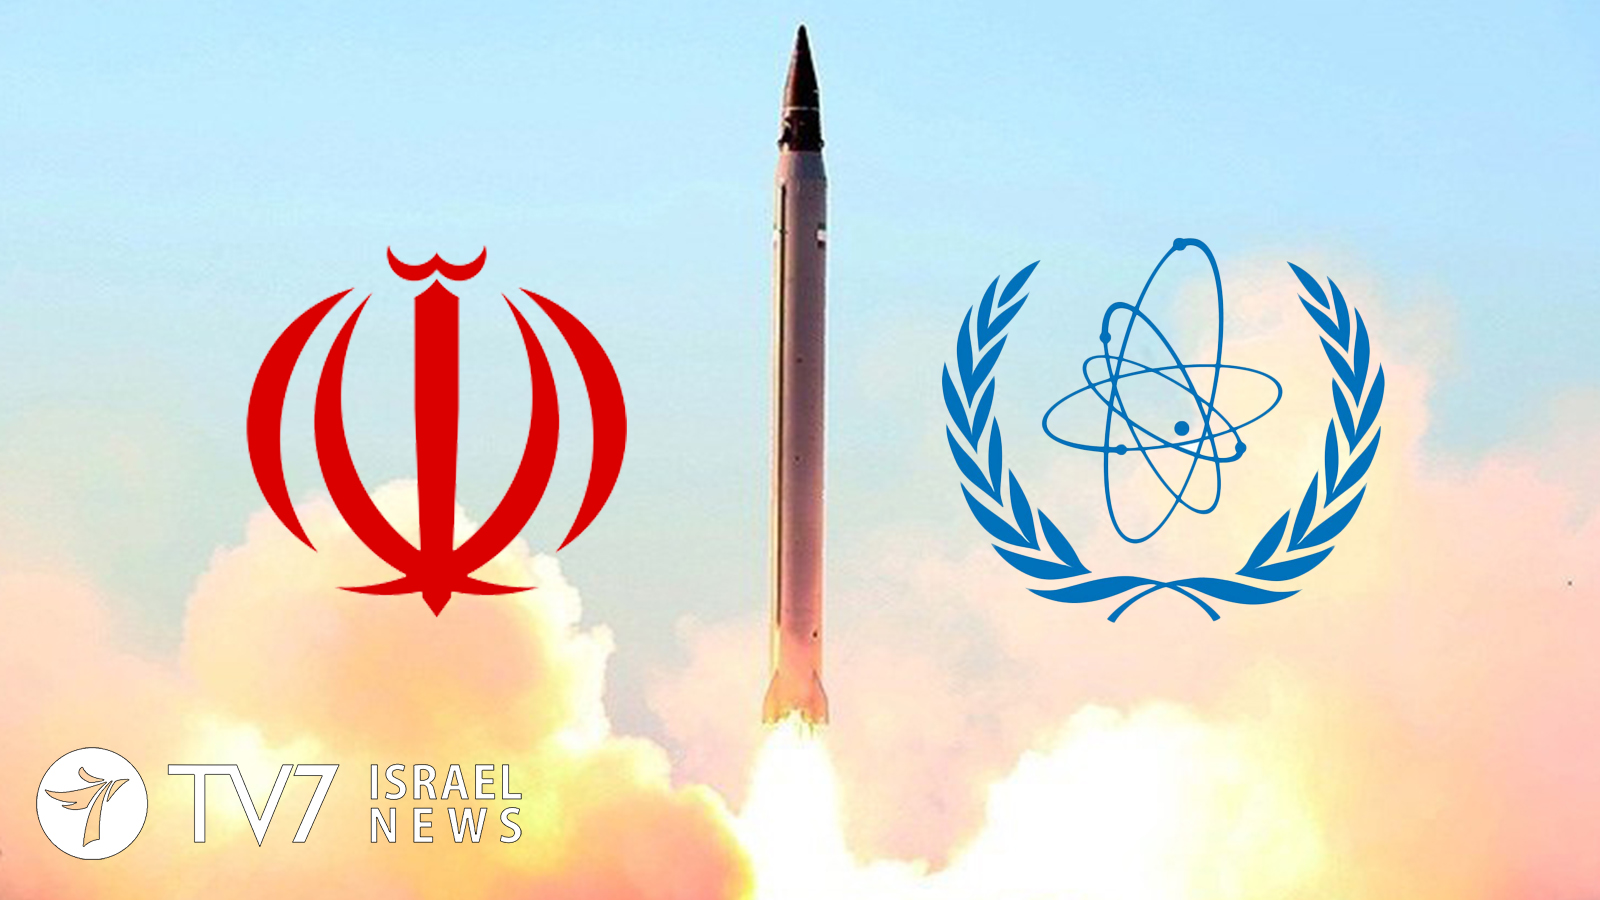 Iran refuses to cooperate with IAEA - TV7 Israel News